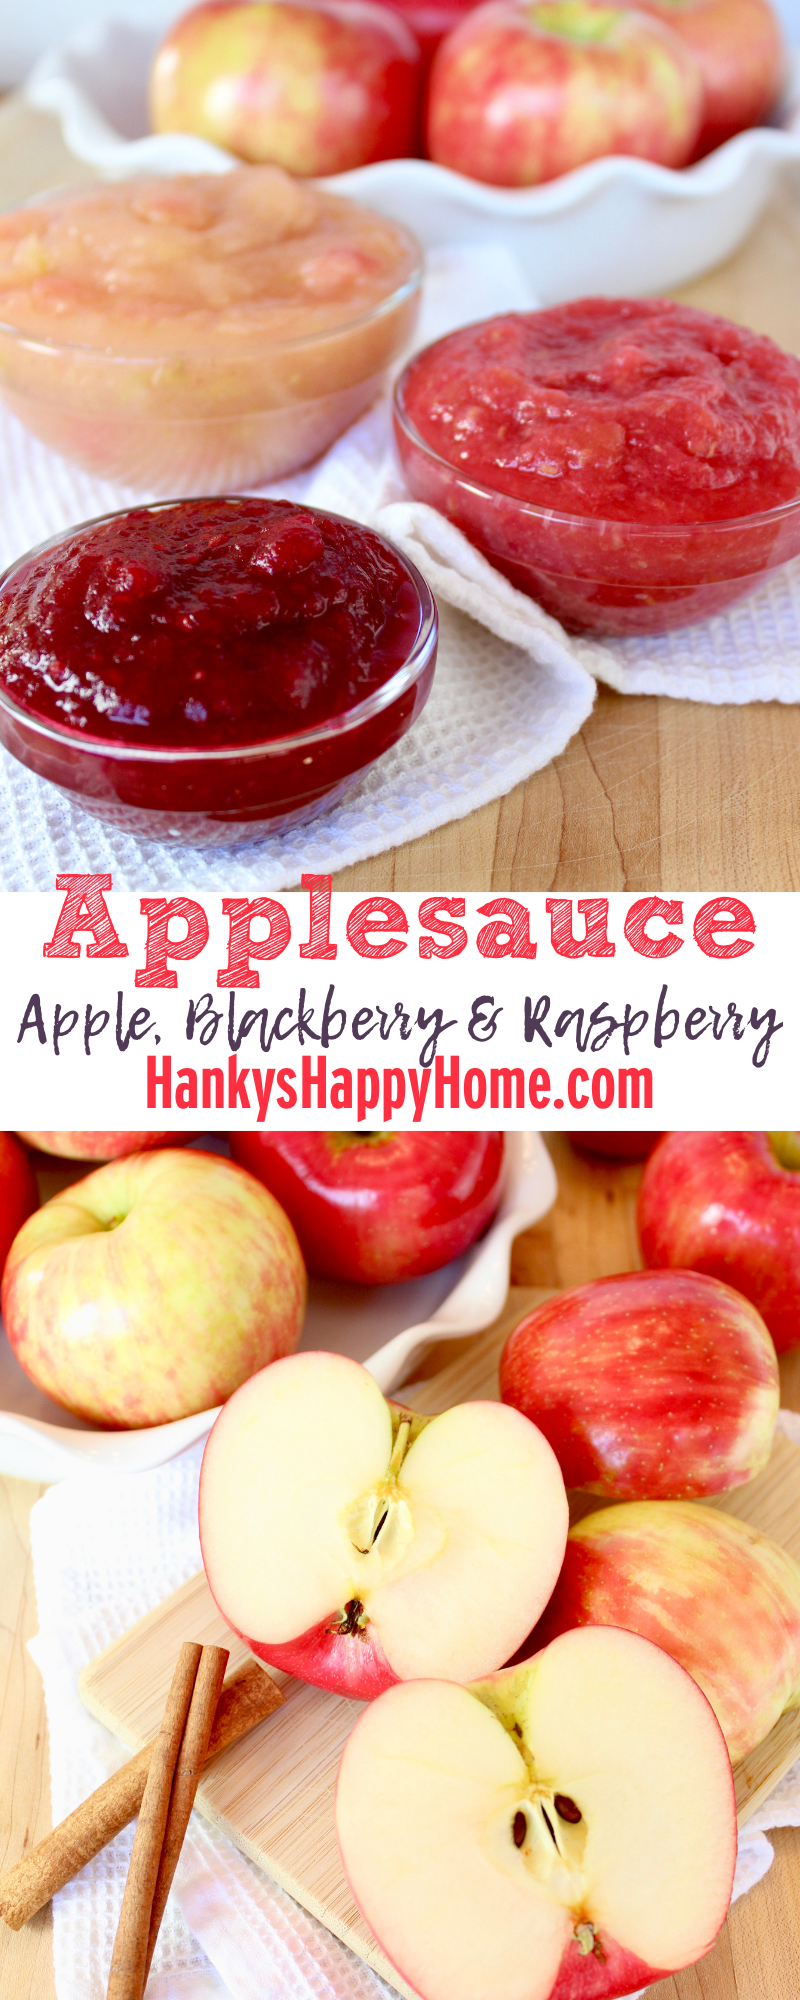 This Applesauce makes a healthy and sweet snack for toddlers (and parents) without added sugar!